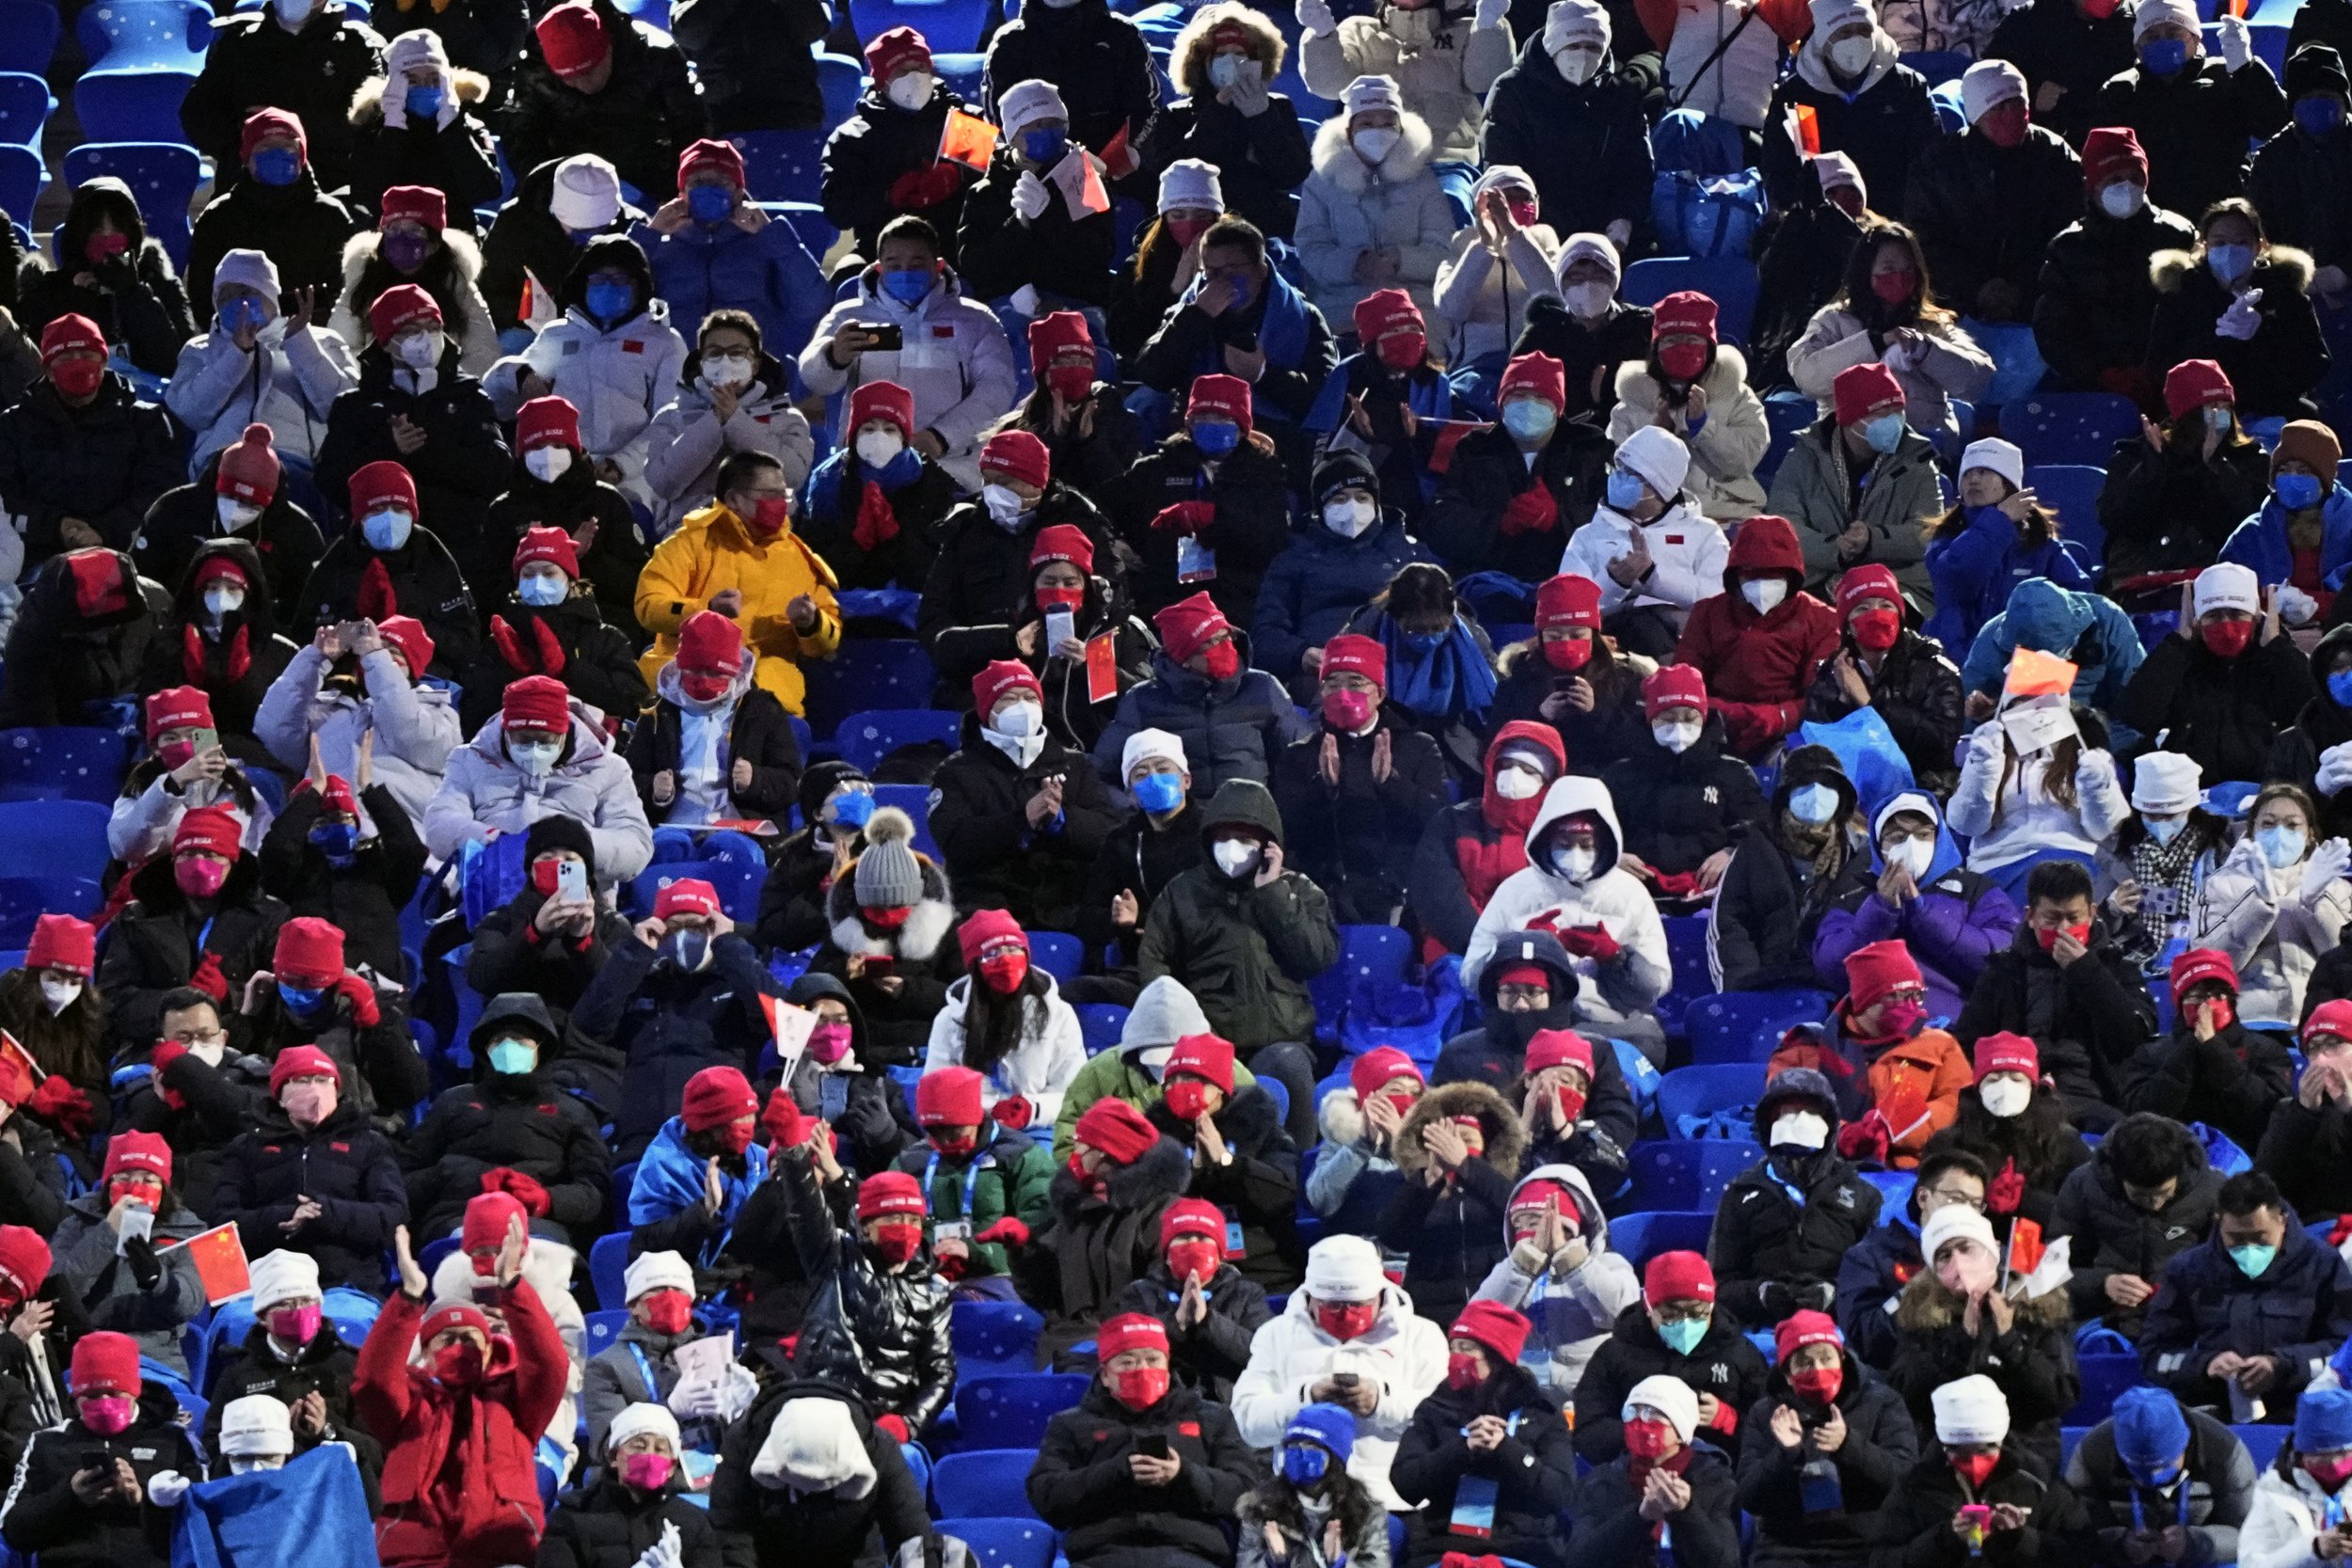  Spectators wait for the start of the opening ceremony of the 2022 Winter Olympics, Friday, Feb. 4, 2022, in Beijing. (AP Photo/David J. Phillip) 